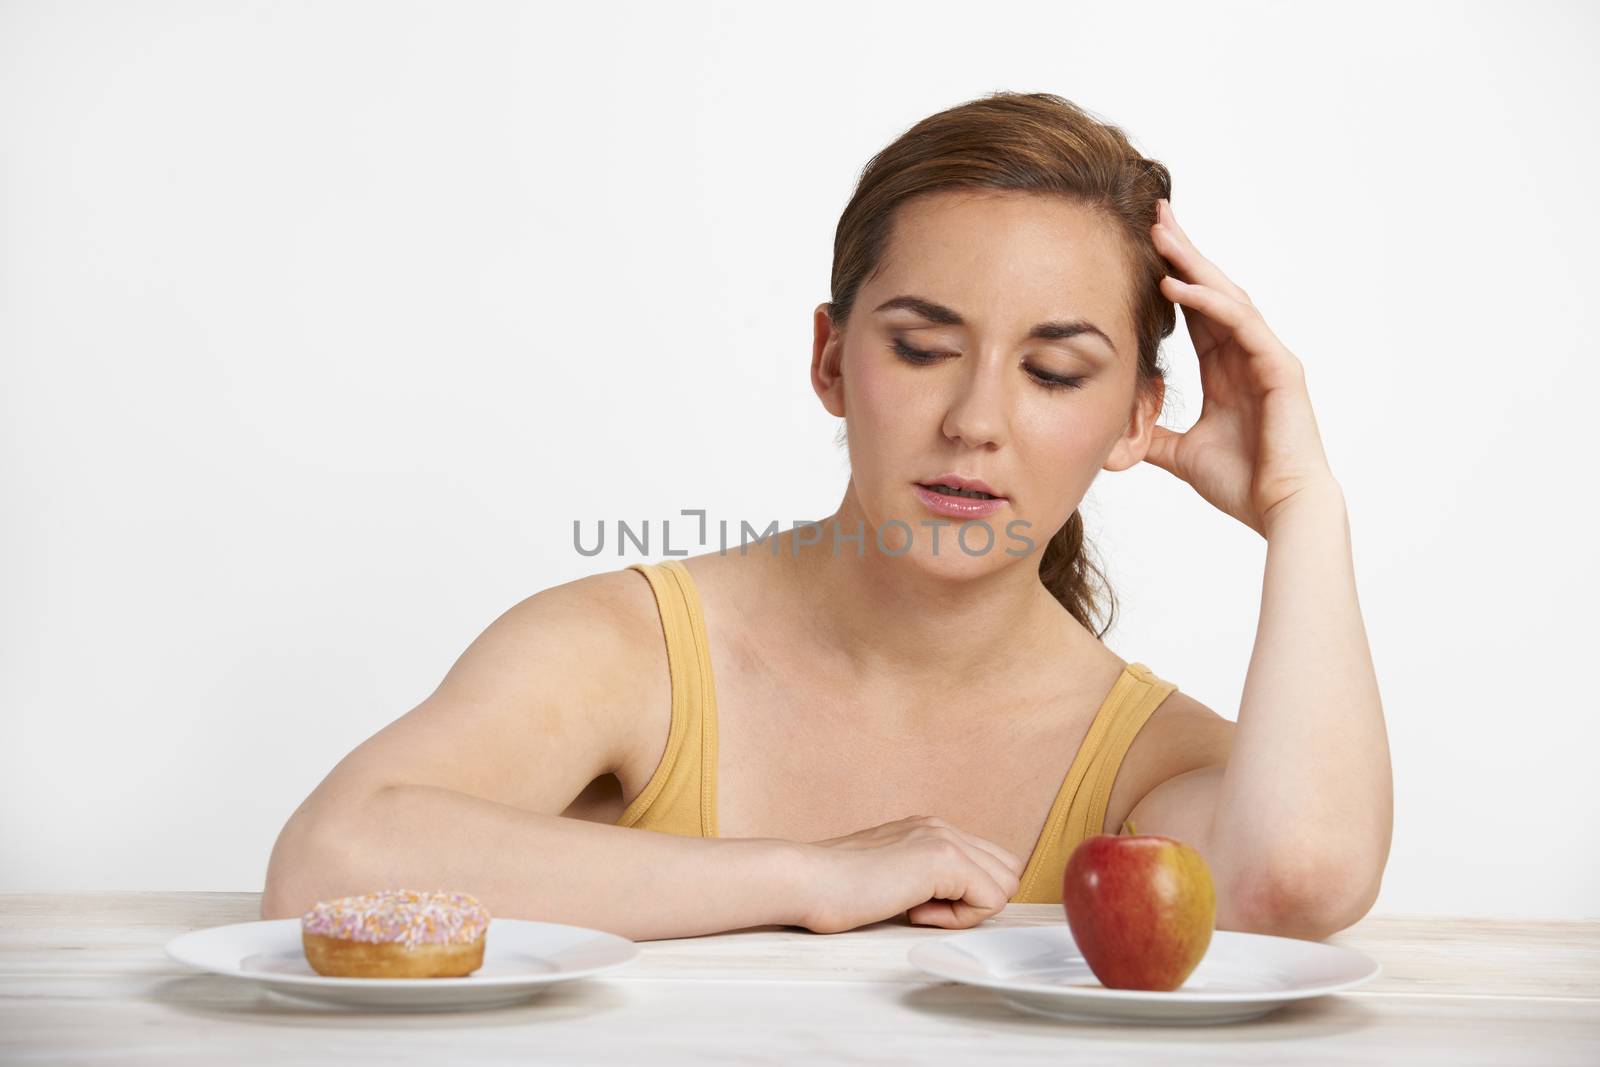 Woman Choosing Between Apple And Doughnut For Snack by HWS